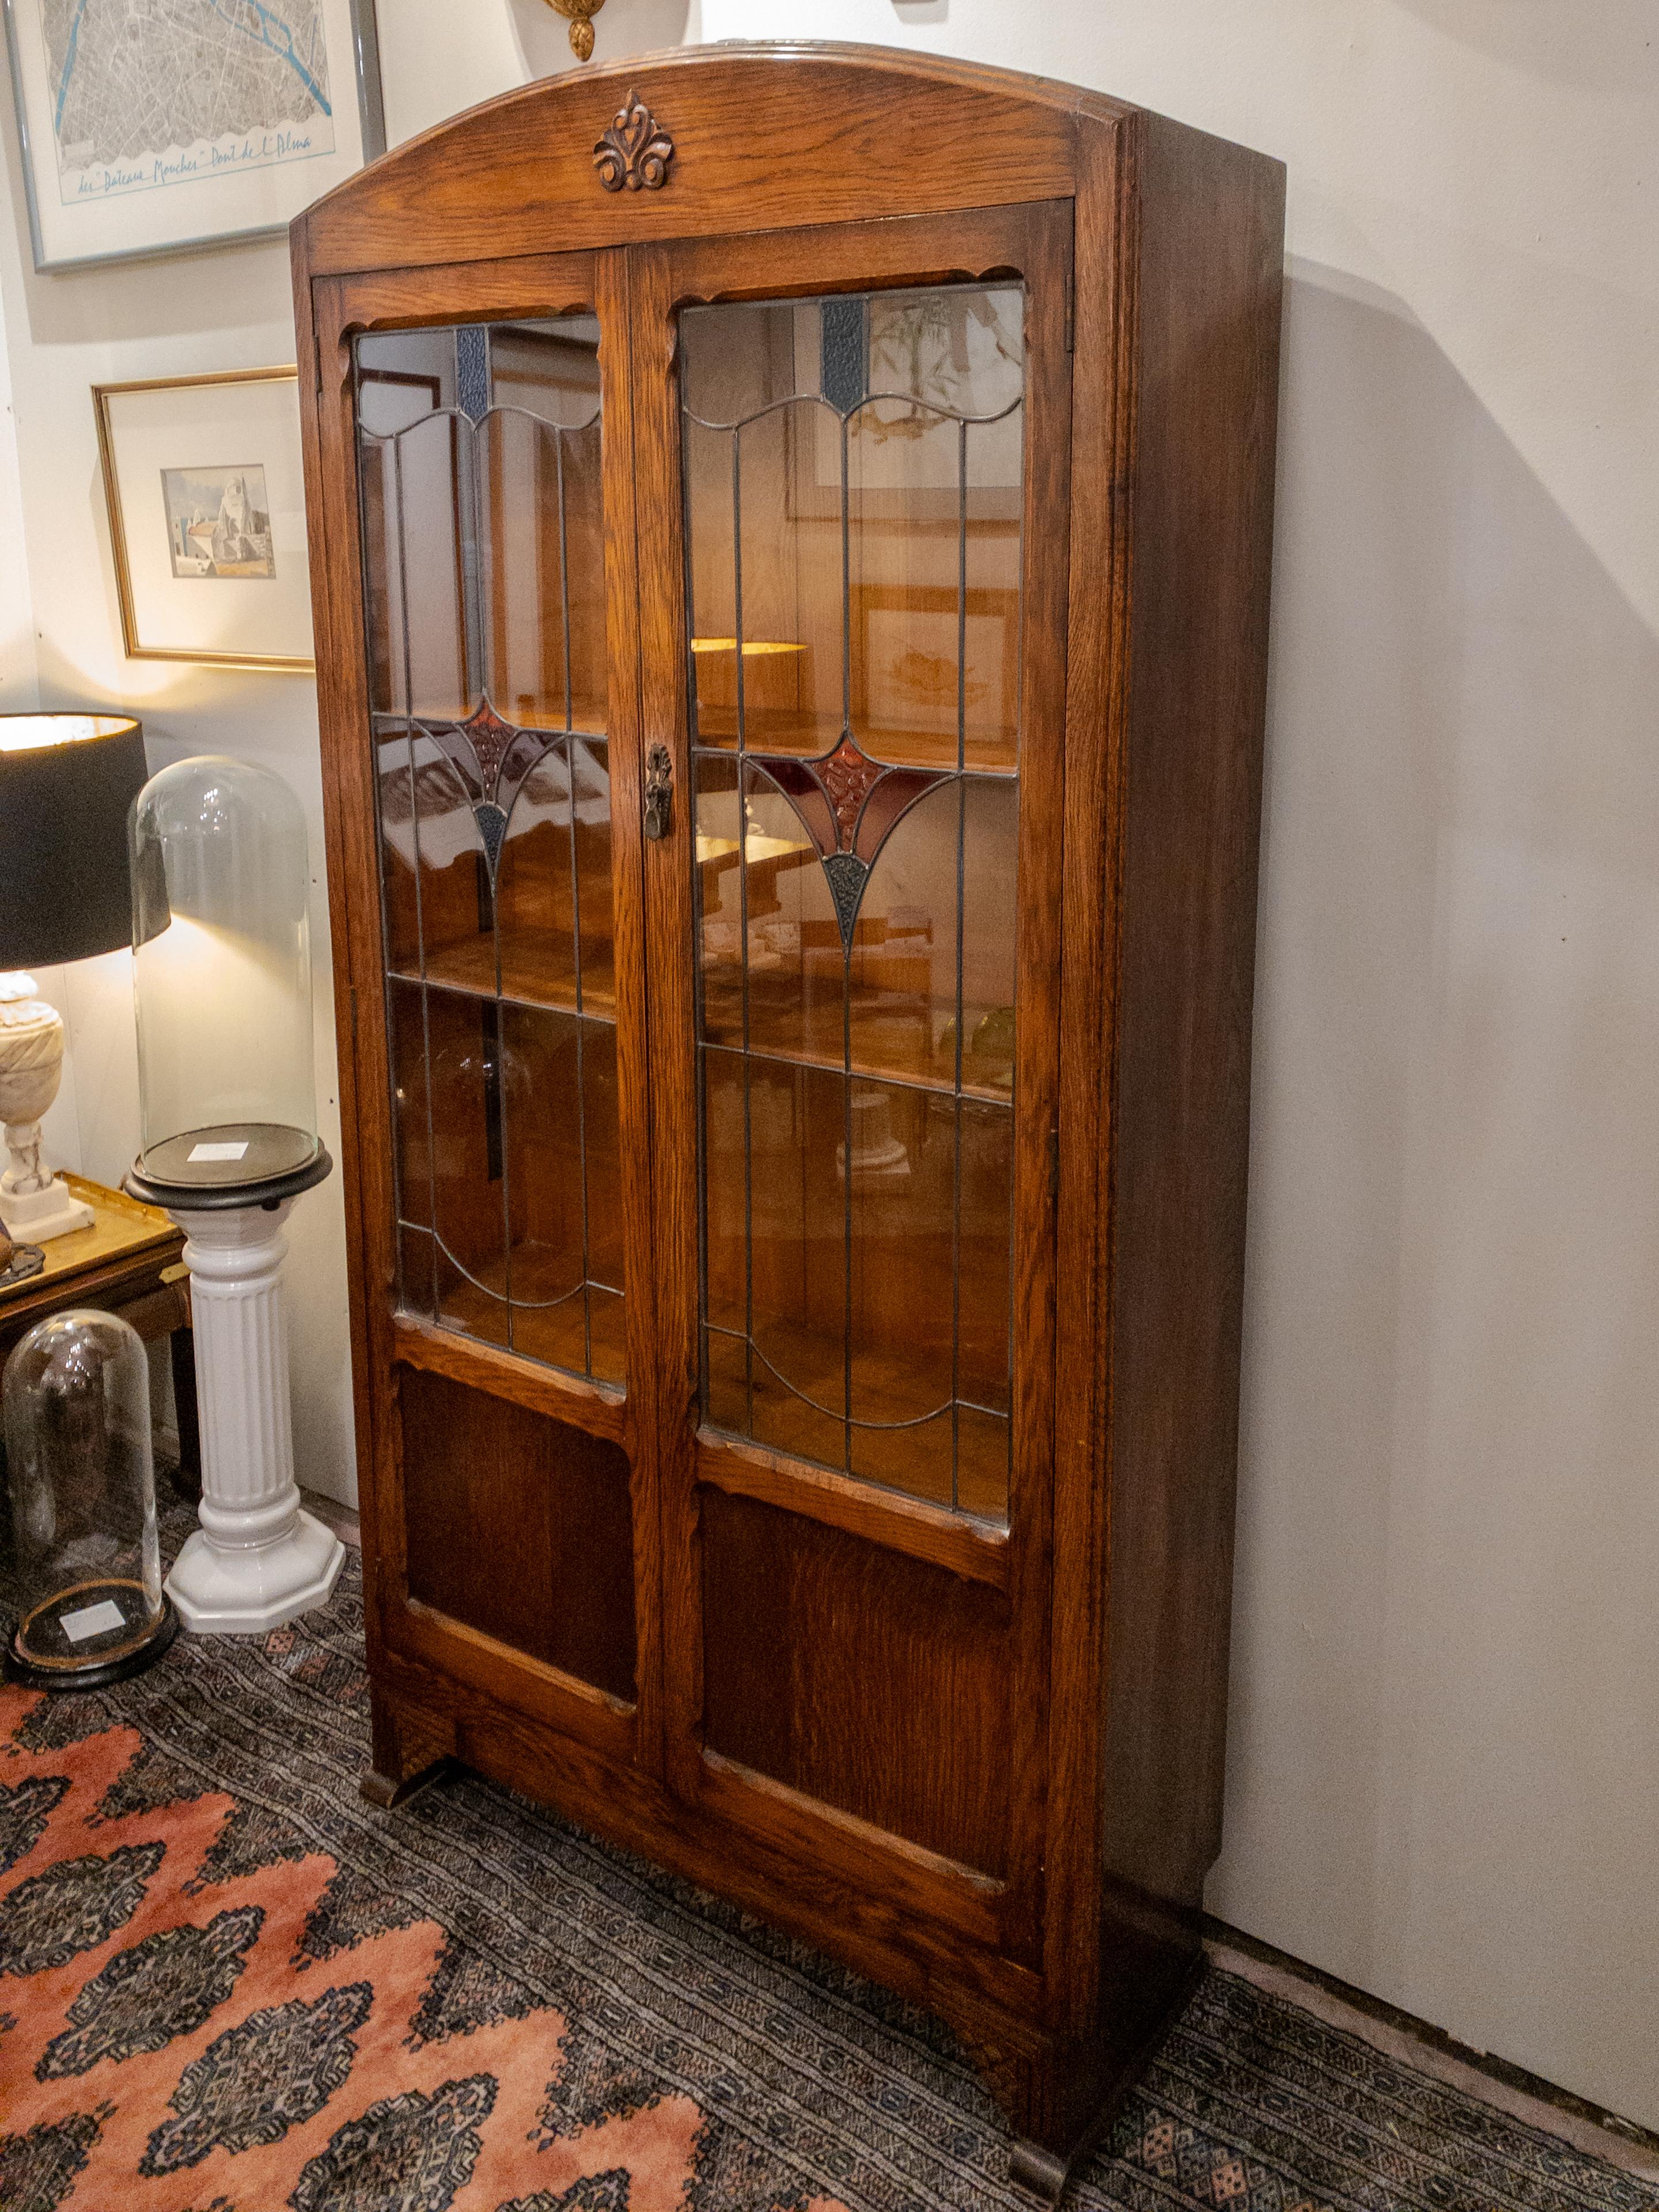 The Antique Arts and Crafts Style Oak Bookcase is a timeless piece of furniture that exudes both functionality and artistic craftsmanship. It embodies the essence of the Arts and Crafts movement, which valued traditional craftsmanship and